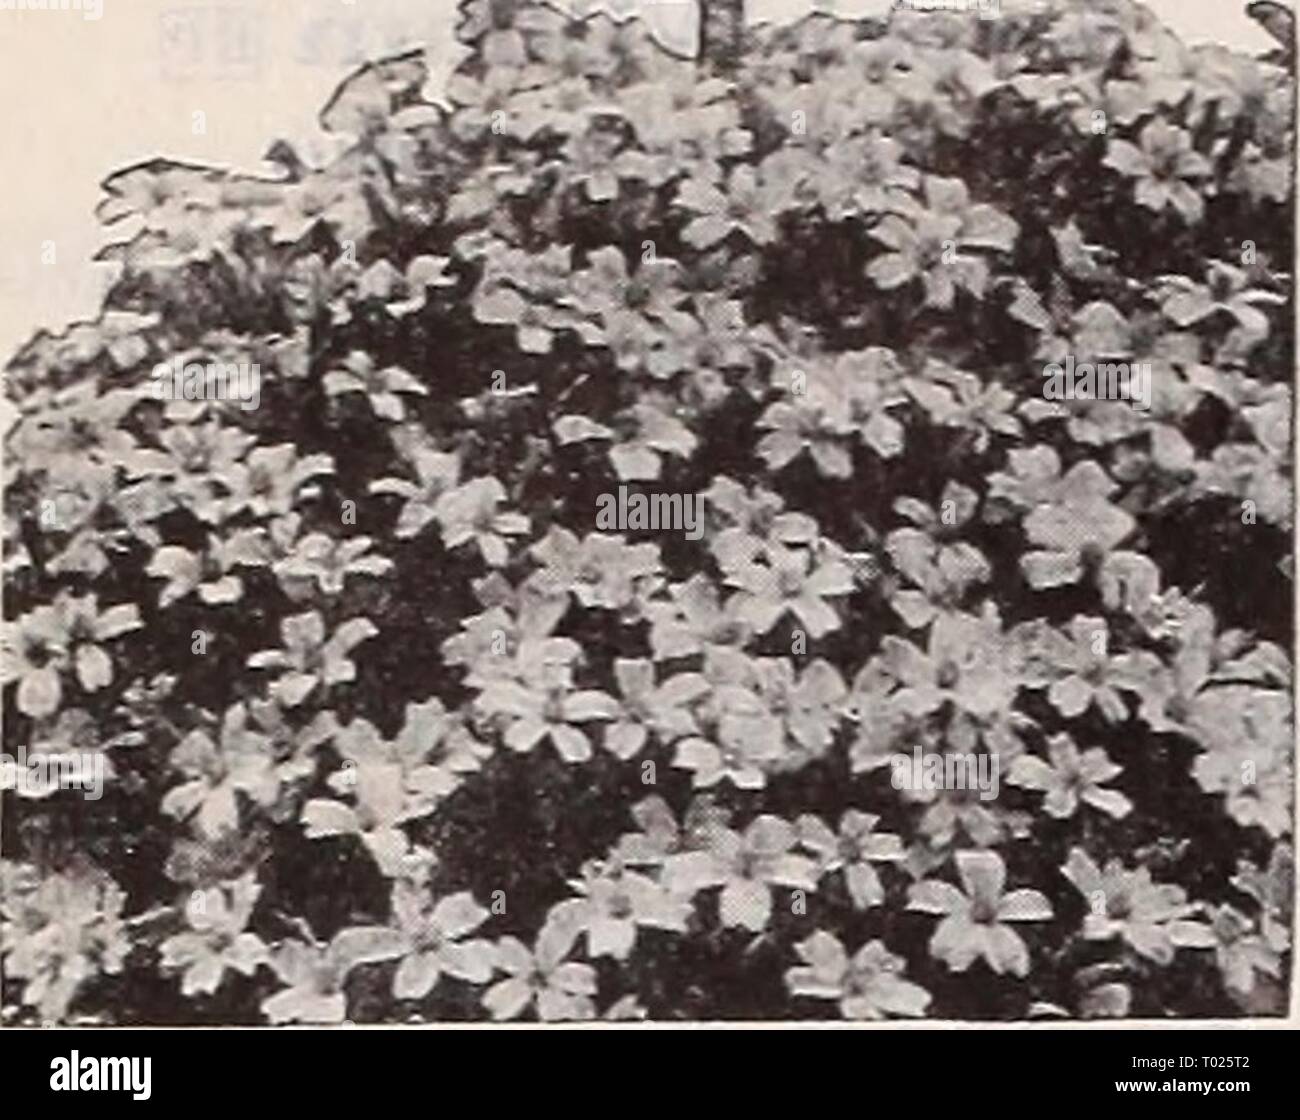 Dreer's garden book 1939 : 101 years of Dreer quality seeds plants bulbs . dreersgardenbook1939henr Year: 1939  HENRY A. DREER, Philadelphia, Pa. ^a^vT^    Tagetes signata pumila Tagetes ® a Miniature Marigold 4253 Signata pumila. A dwarf, com- pact annual Marigold of bushy habit with Fern-like foliage and lovely single bright golden yellow blooms. 9 inches tall. Pkt. 10c; i oz. 40c. 4261 Tahoka Daisy ® a Machaeranthera tanacetifolia A recent introduction of outstanding merit. Does well even in sections where summers are hot and drj'. Graceful, lace- like, light green foliage and lovely, daisy Stock Photo